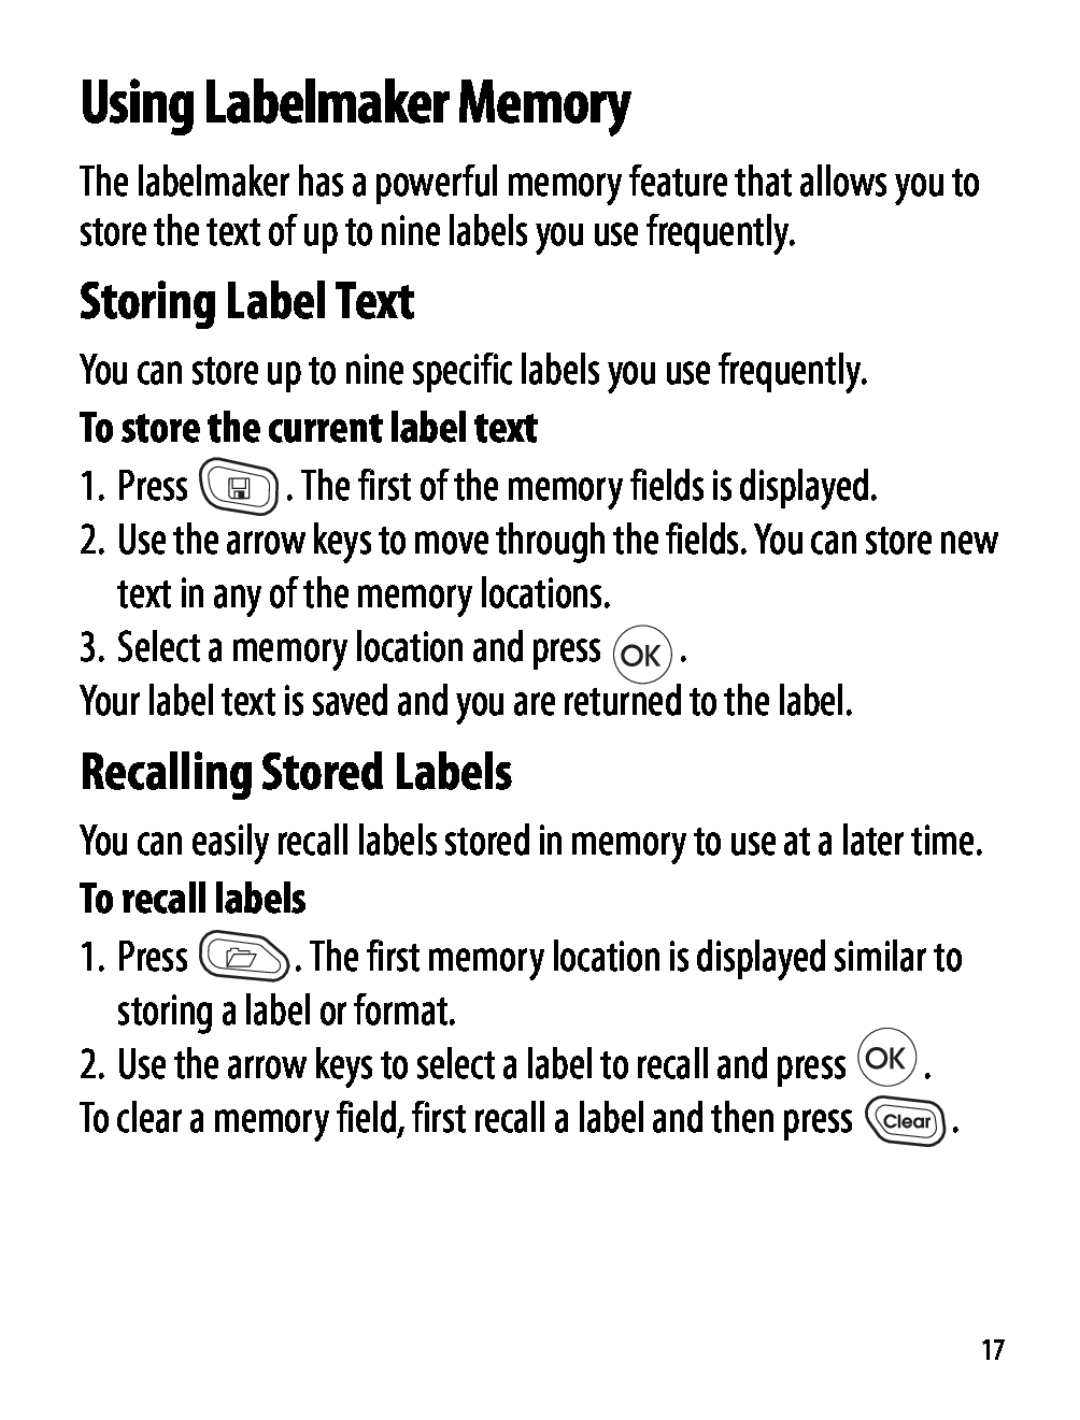 Dymo manual Using Labelmaker Memory, Storing Label Text, Recalling Stored Labels, To store the current label text 